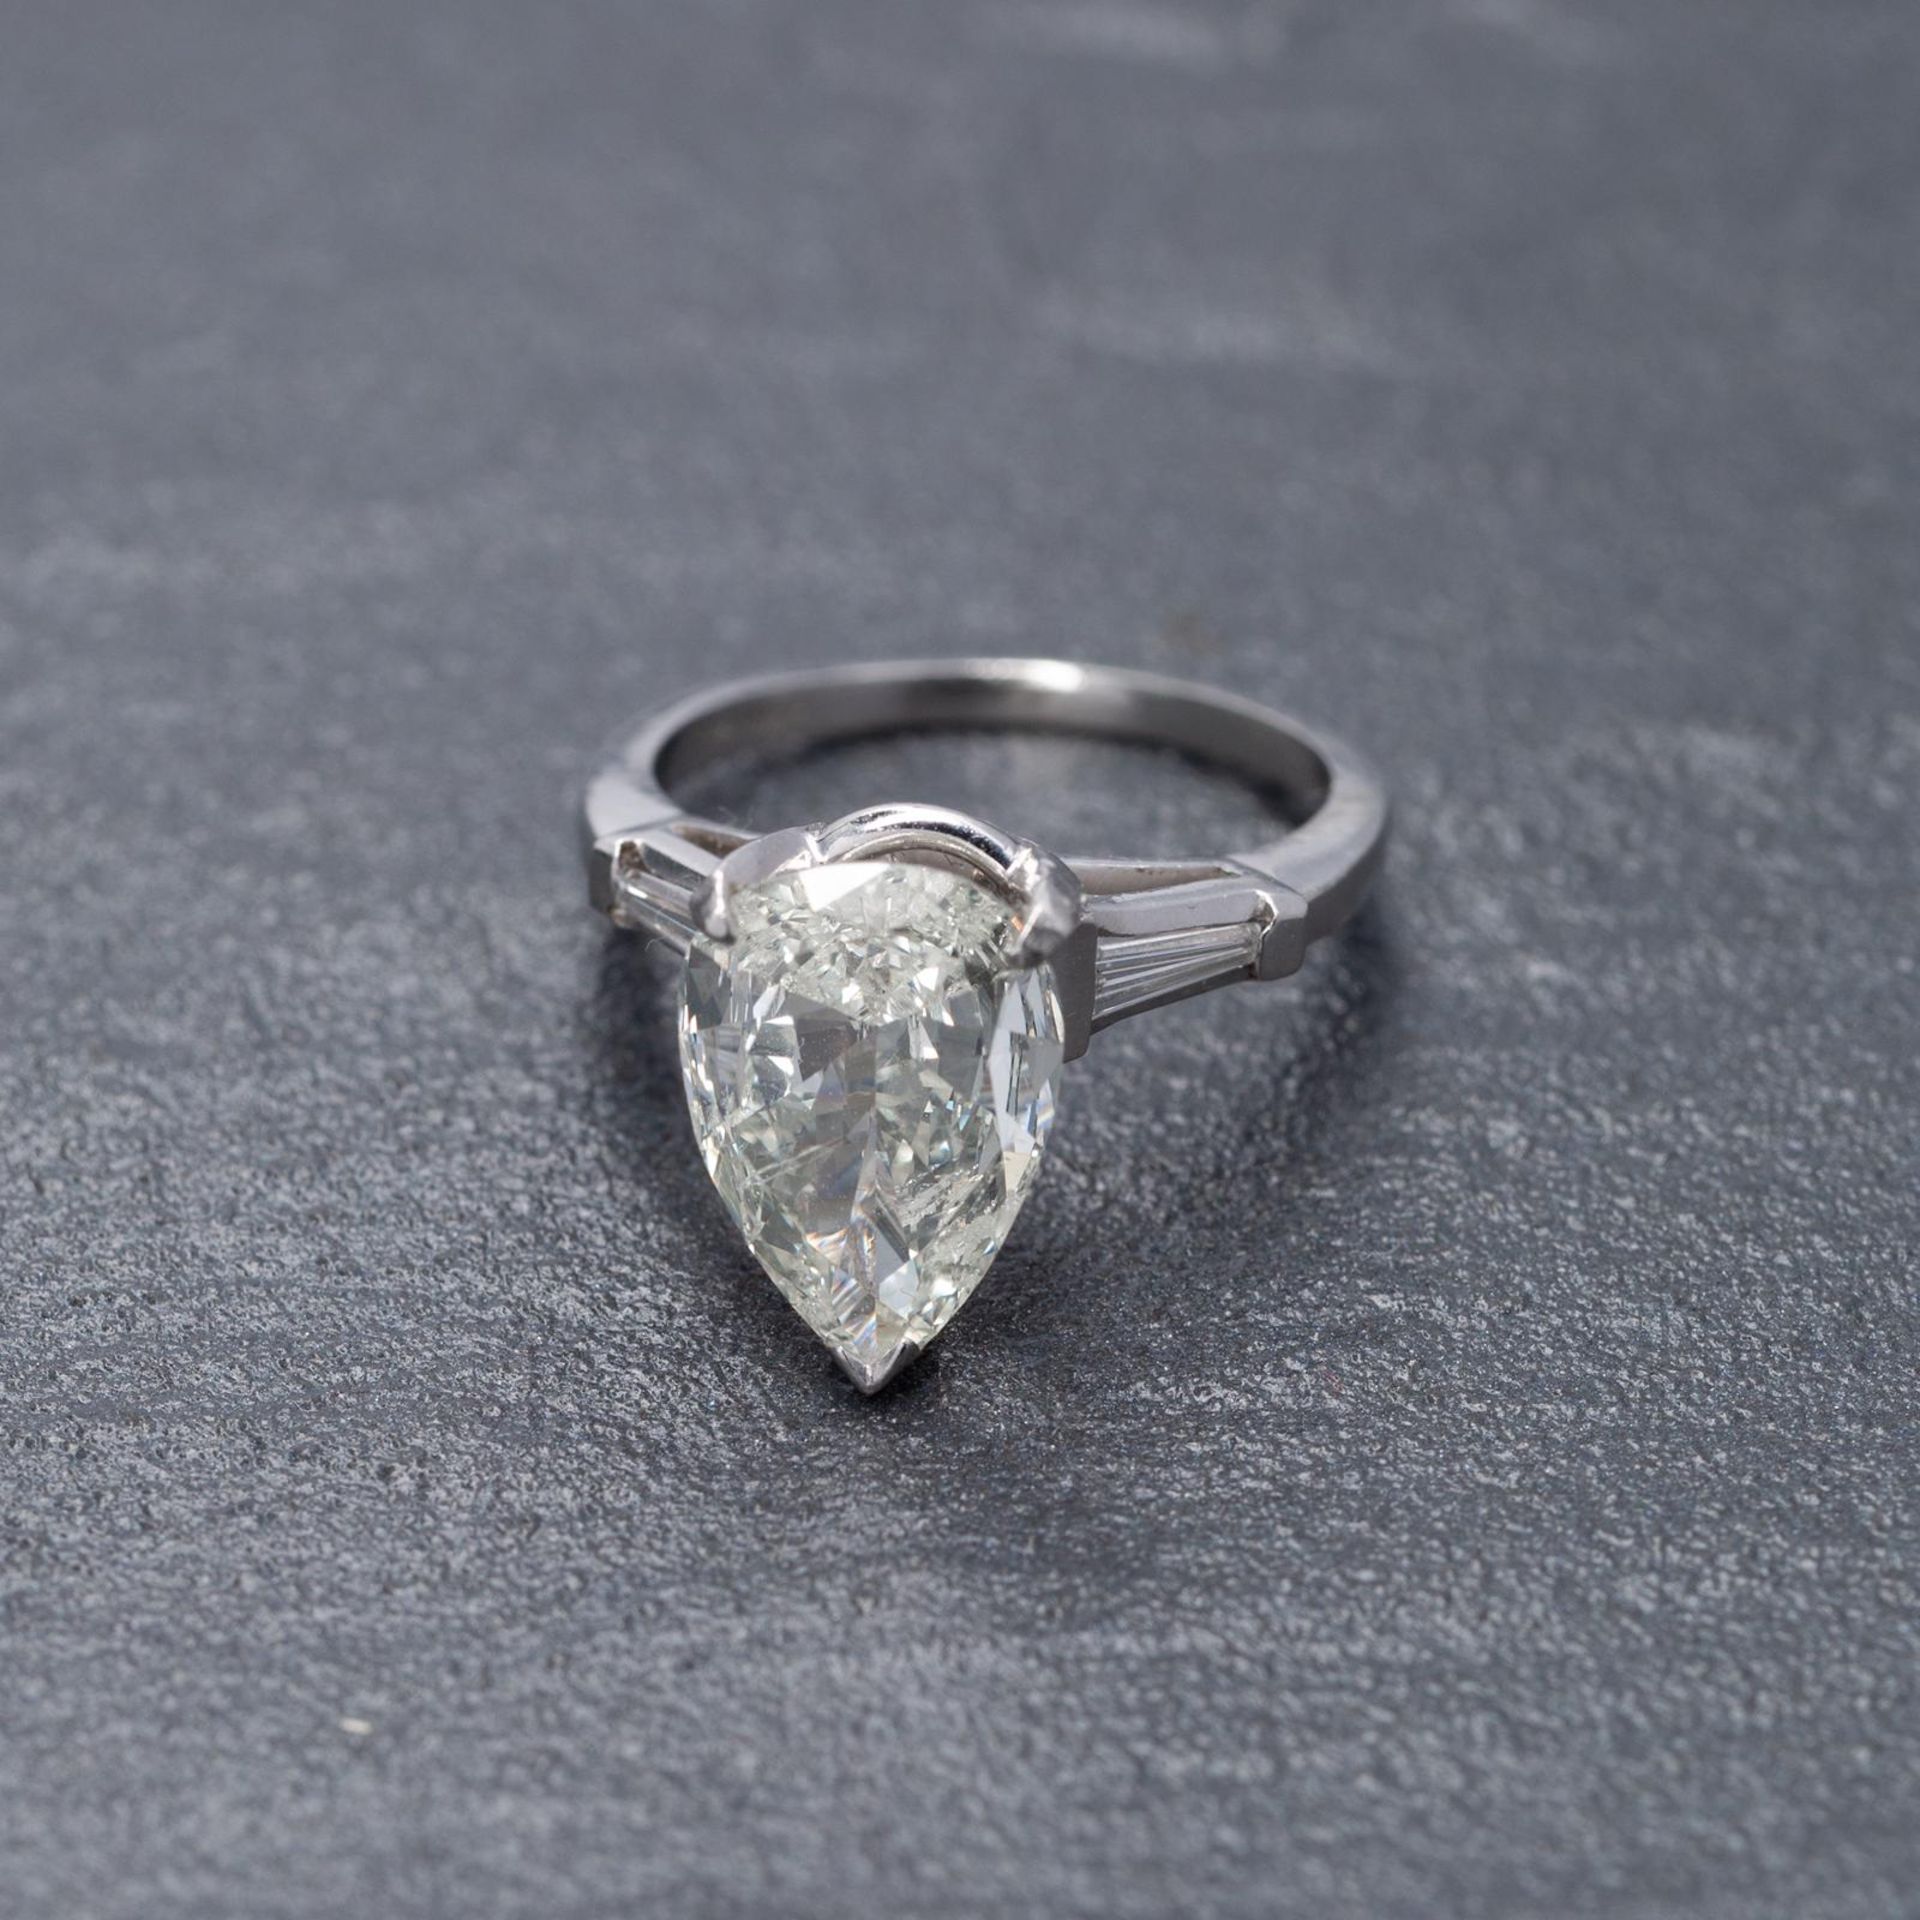 RRP £24,500 Platinum 2.3 Carat Diamond Teardrop Ring (Appraisals Available On Request) (Pictures For